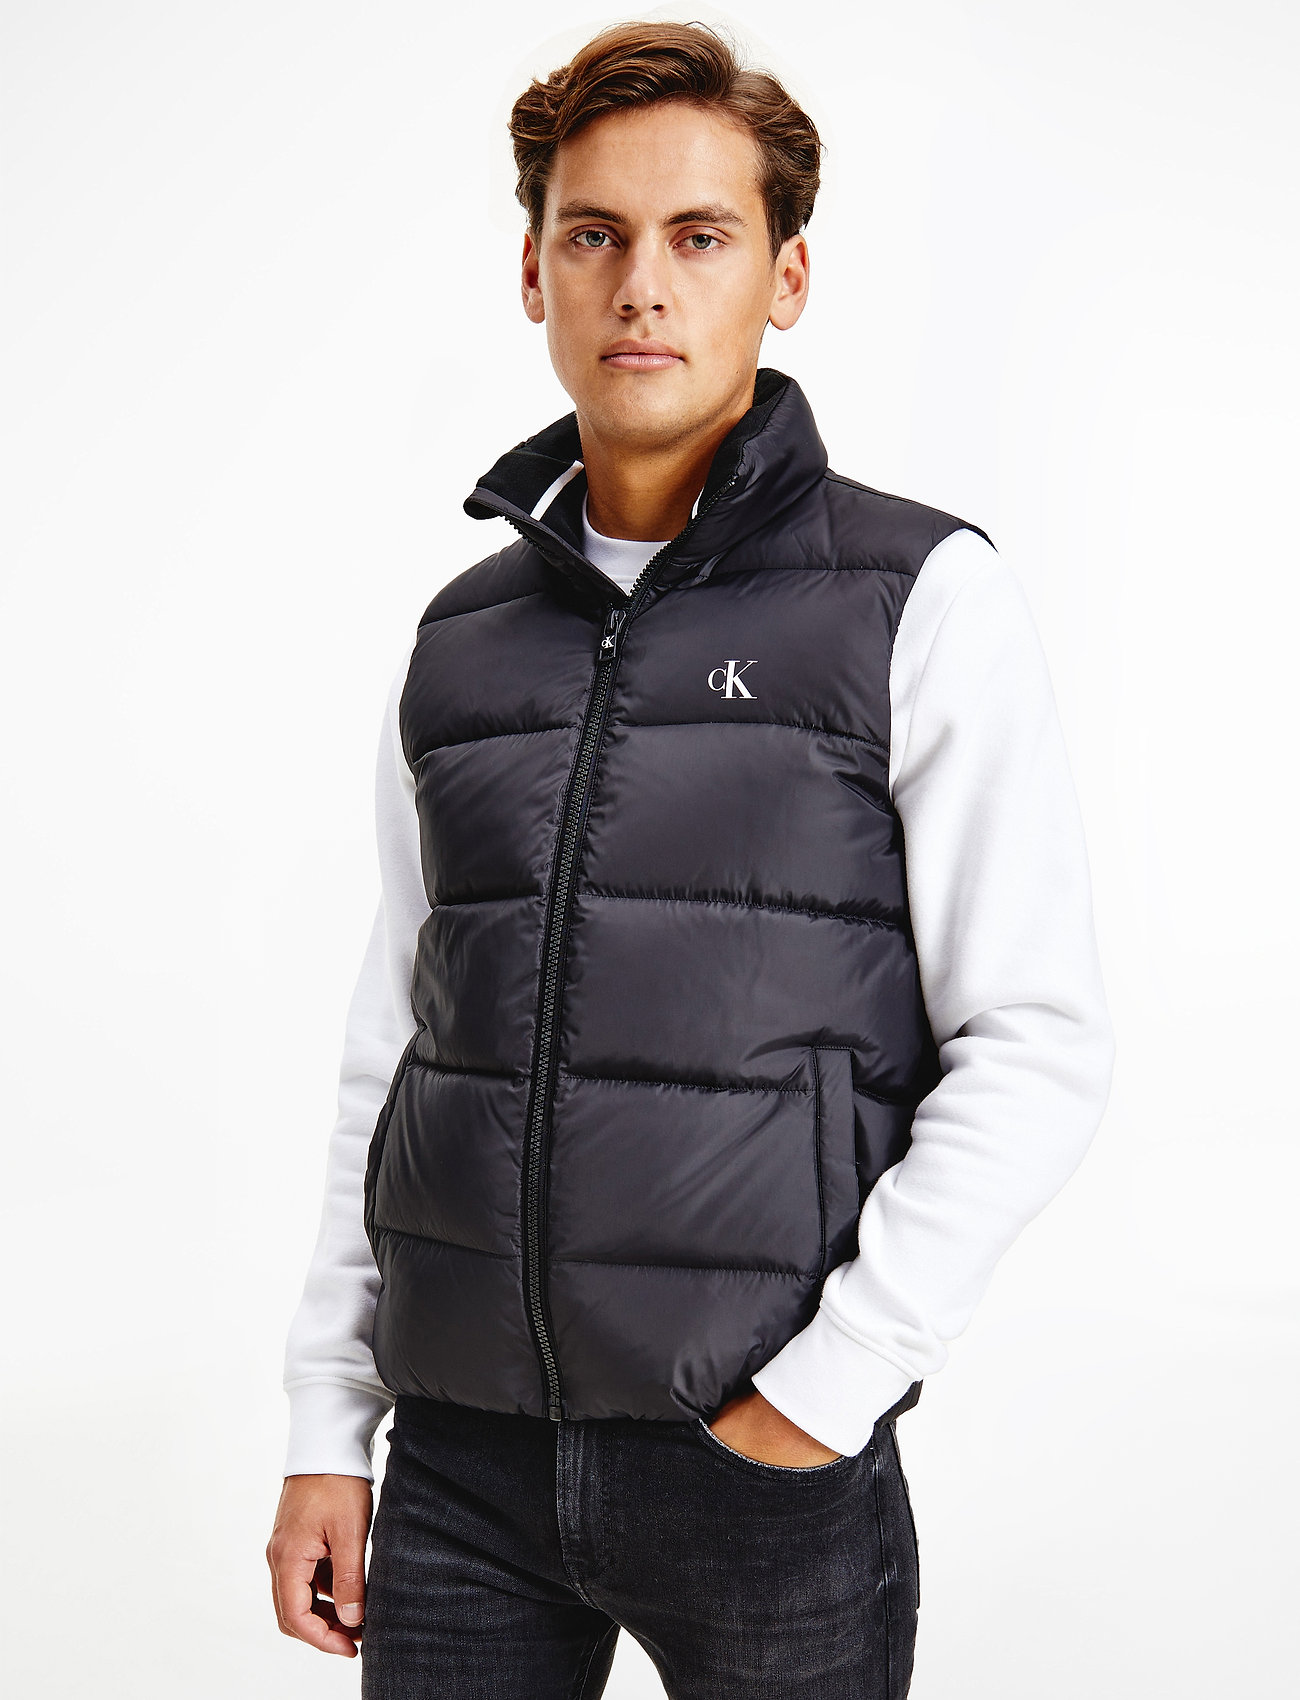 Calvin Klein Jeans Ess - Boozt.com. at Fast Jeans Calvin returns Vests online 199.90 Buy delivery €. easy Down Vest and Klein from